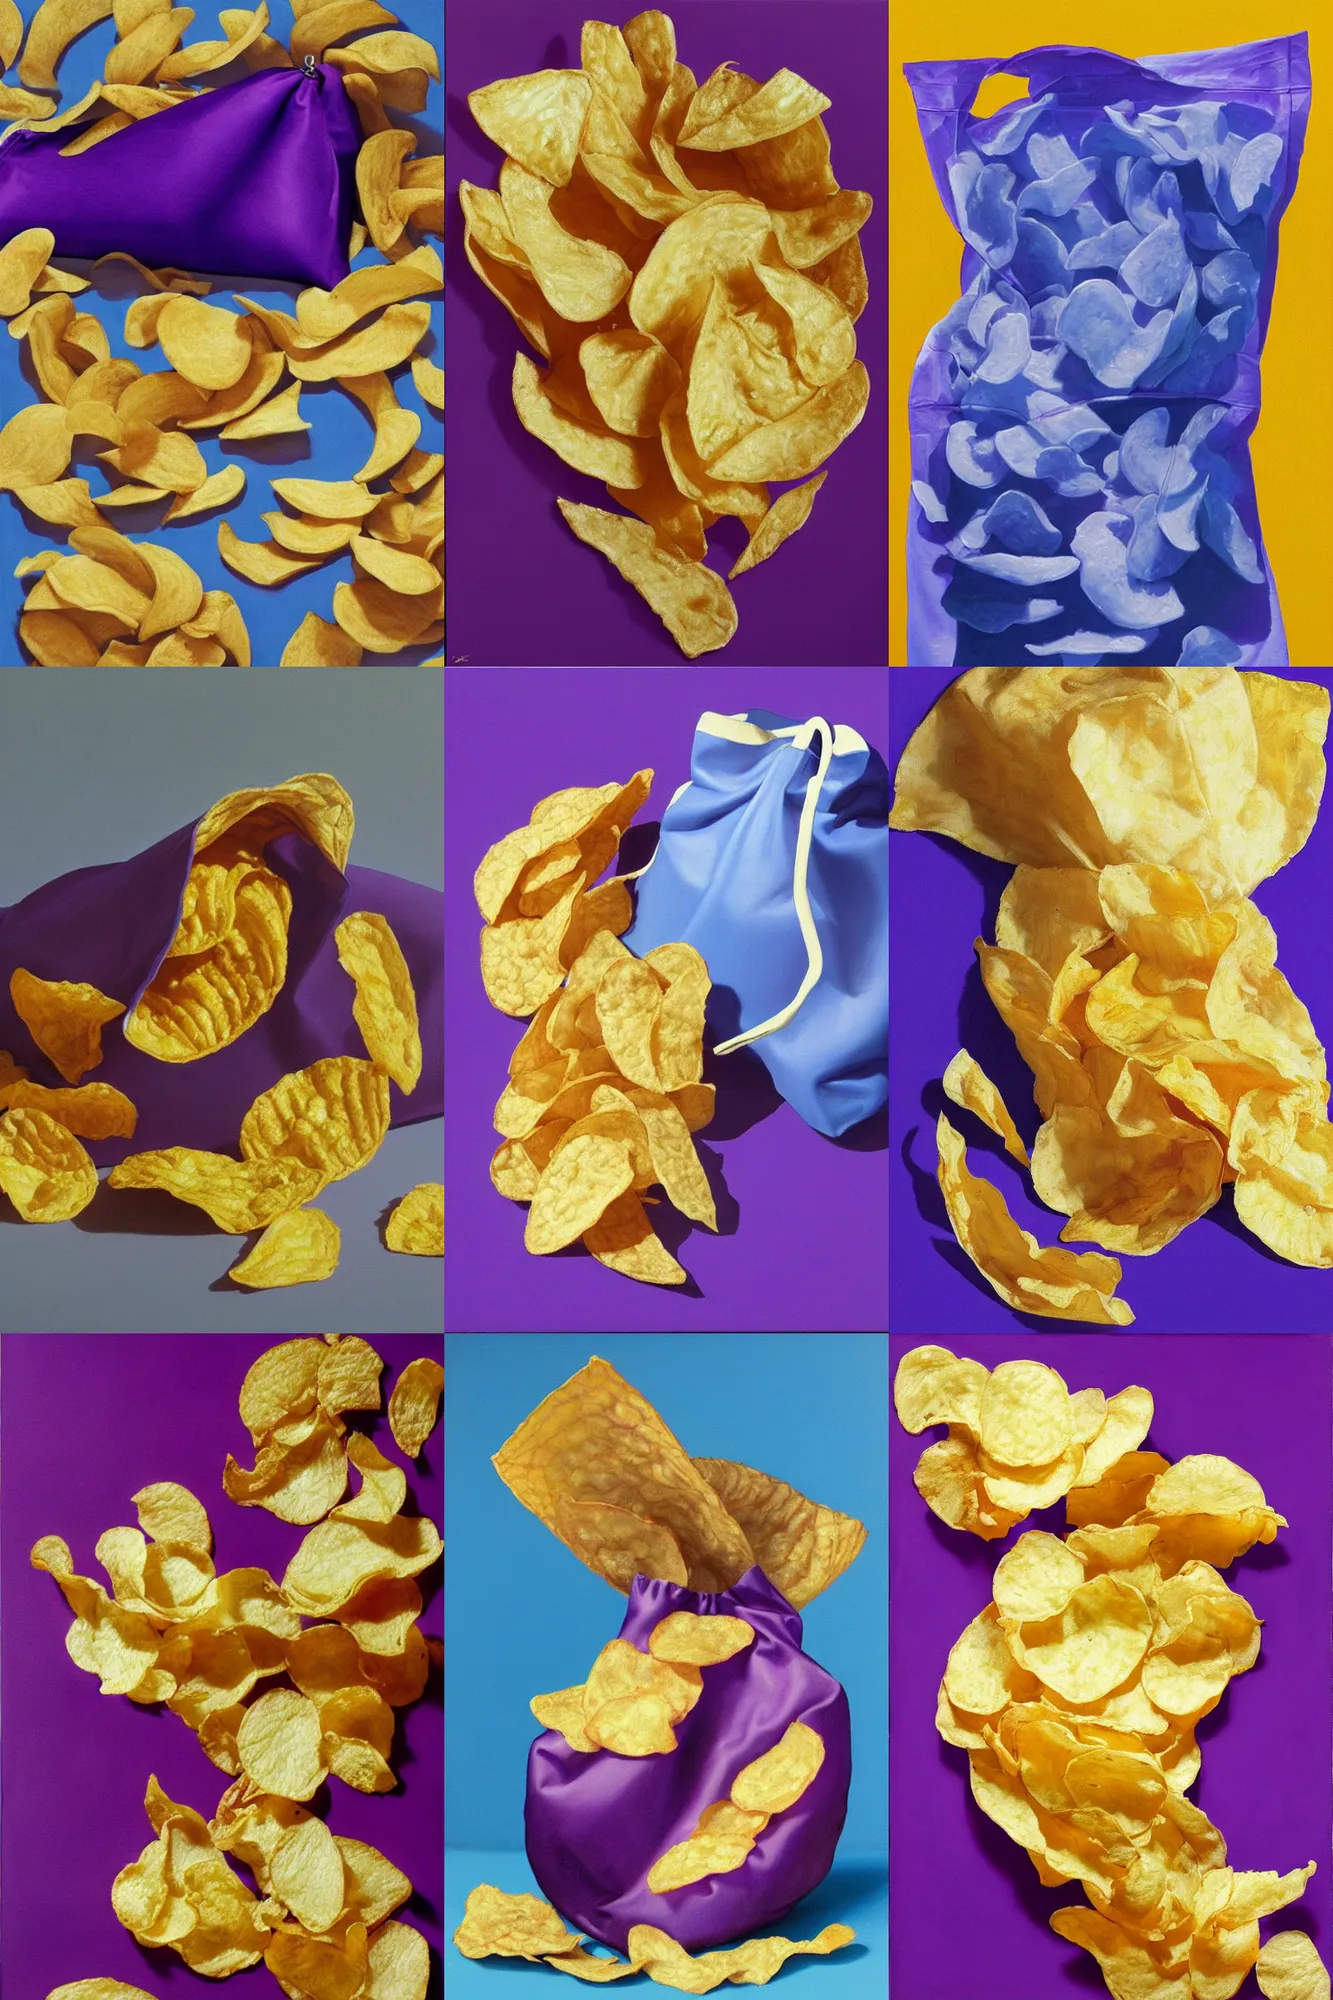 Prompt: an hyper - realistic painting of potato chips with a purple - blue background in the shape of a bag, with no visible bag, by claudio bravo